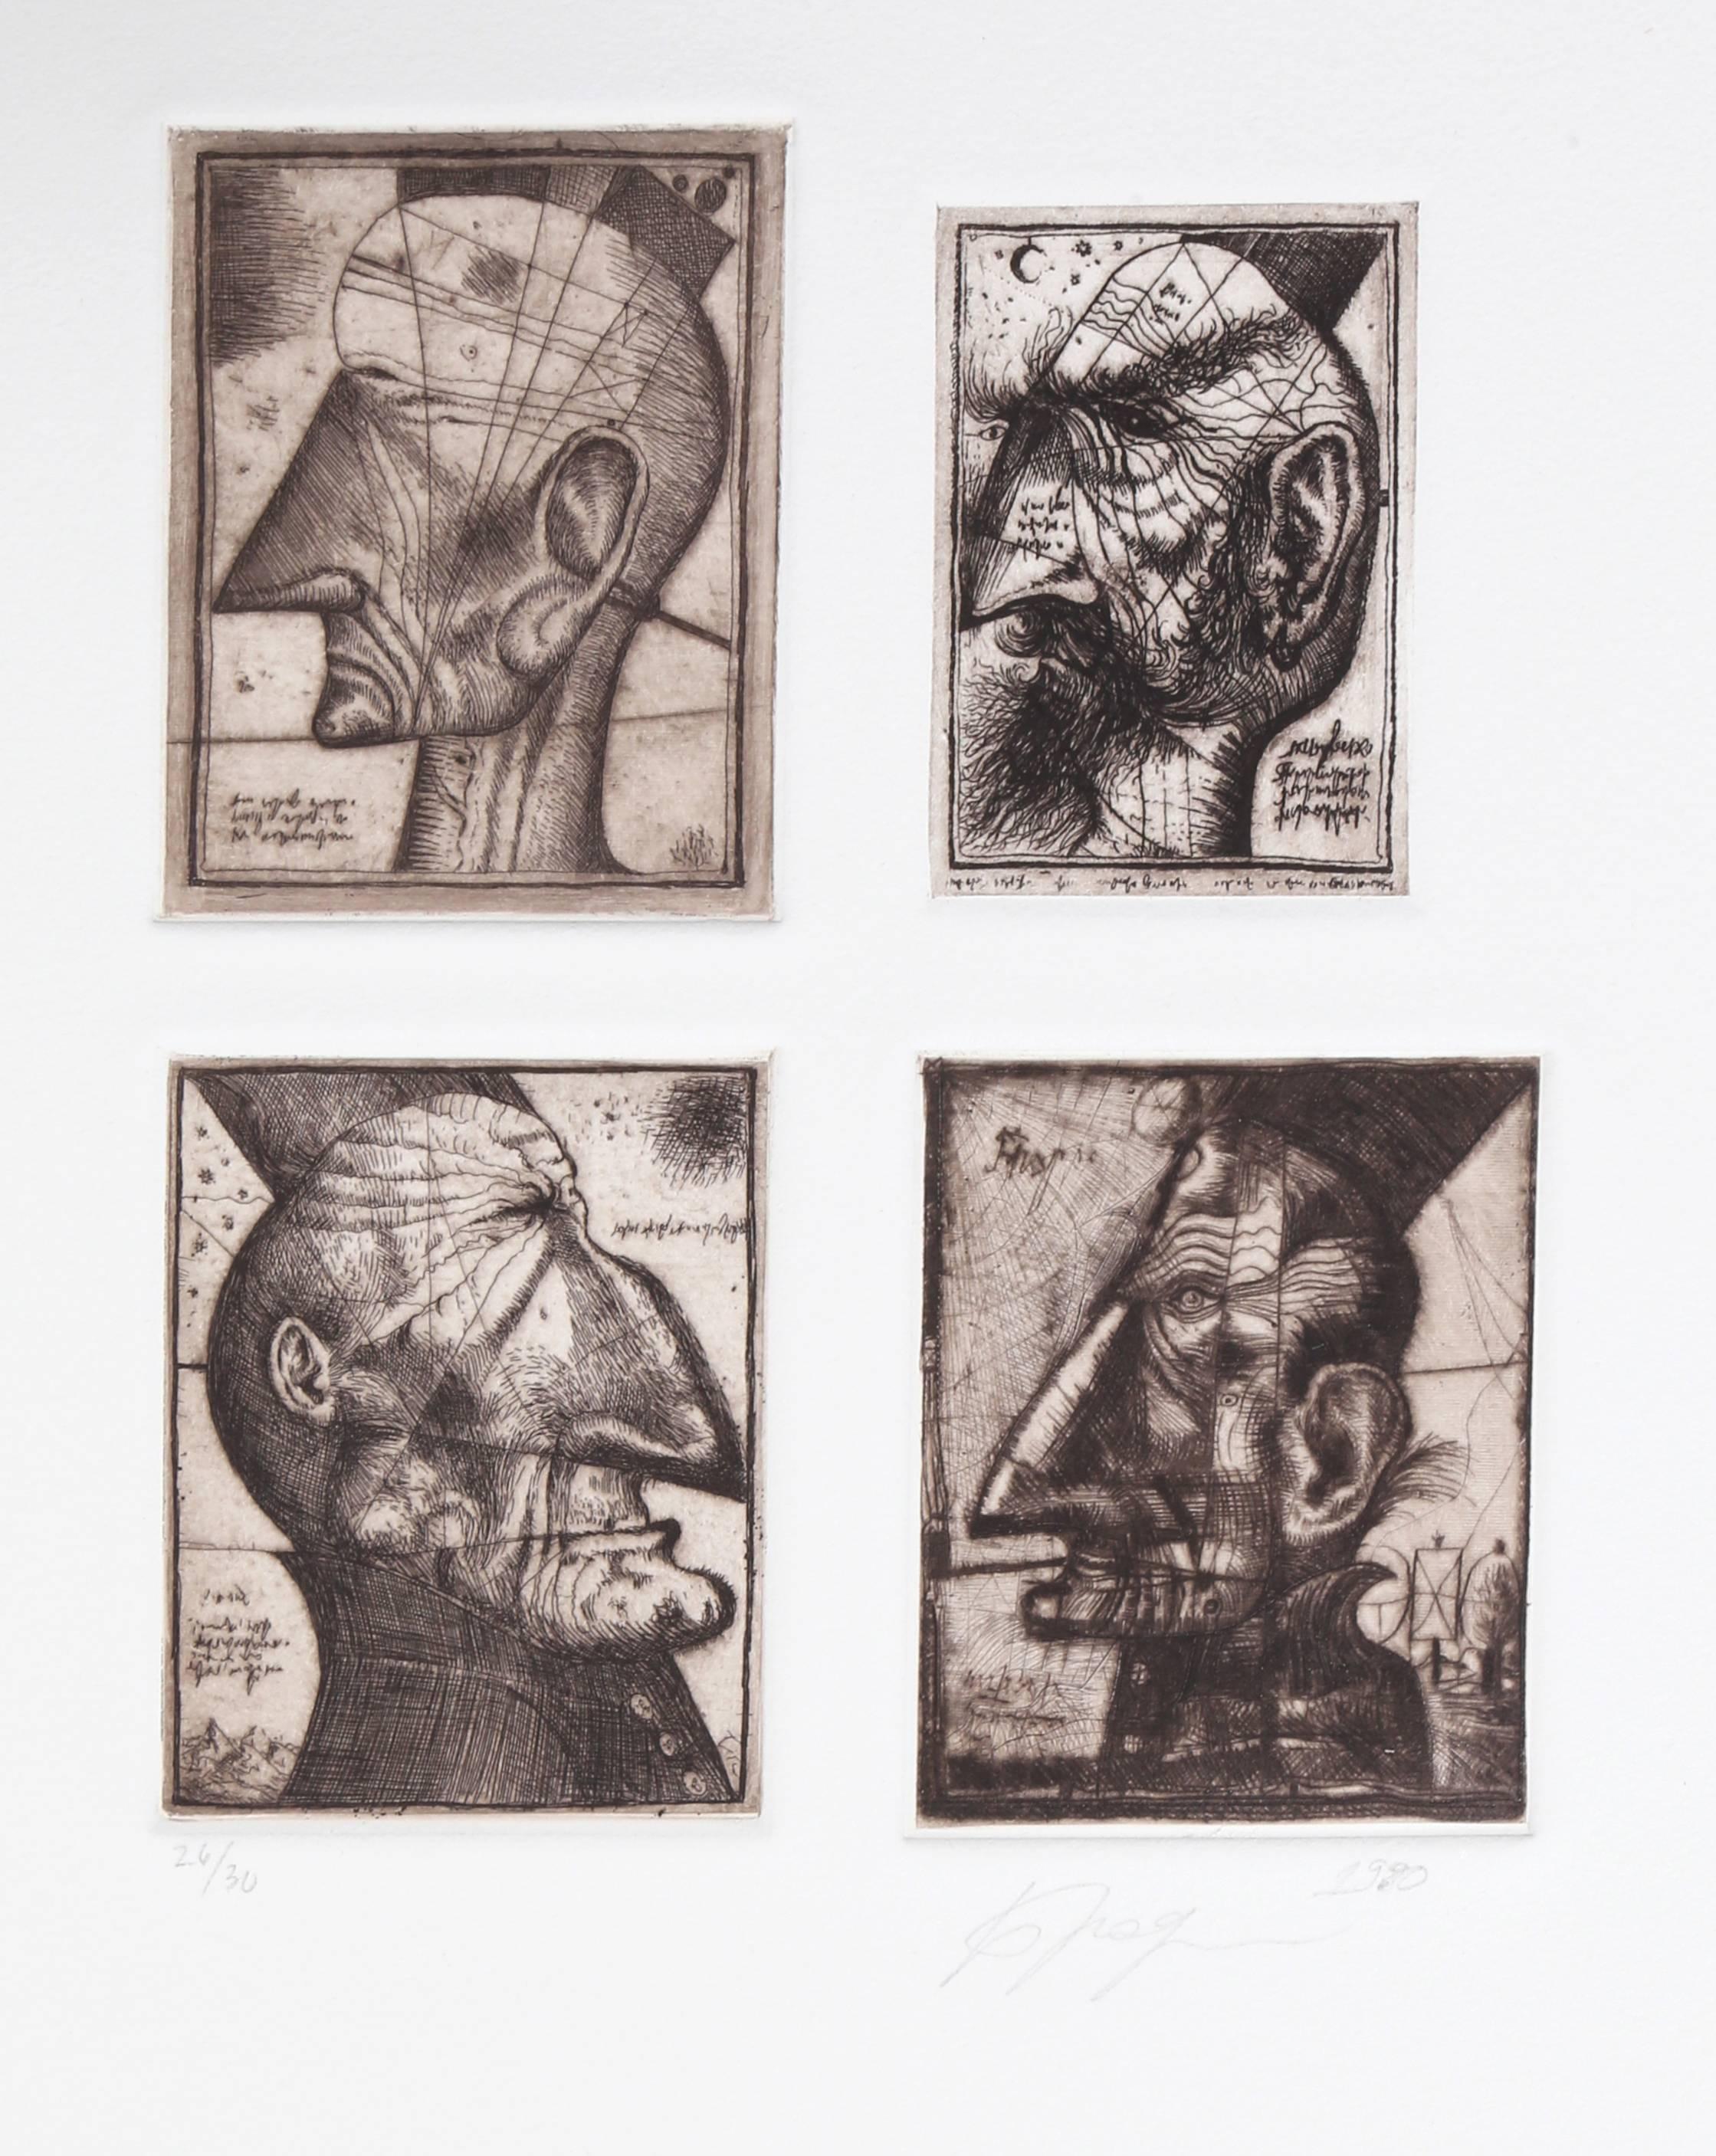 Four Head Composite from Brodsky and Utkin: Projects 1981 - 1990